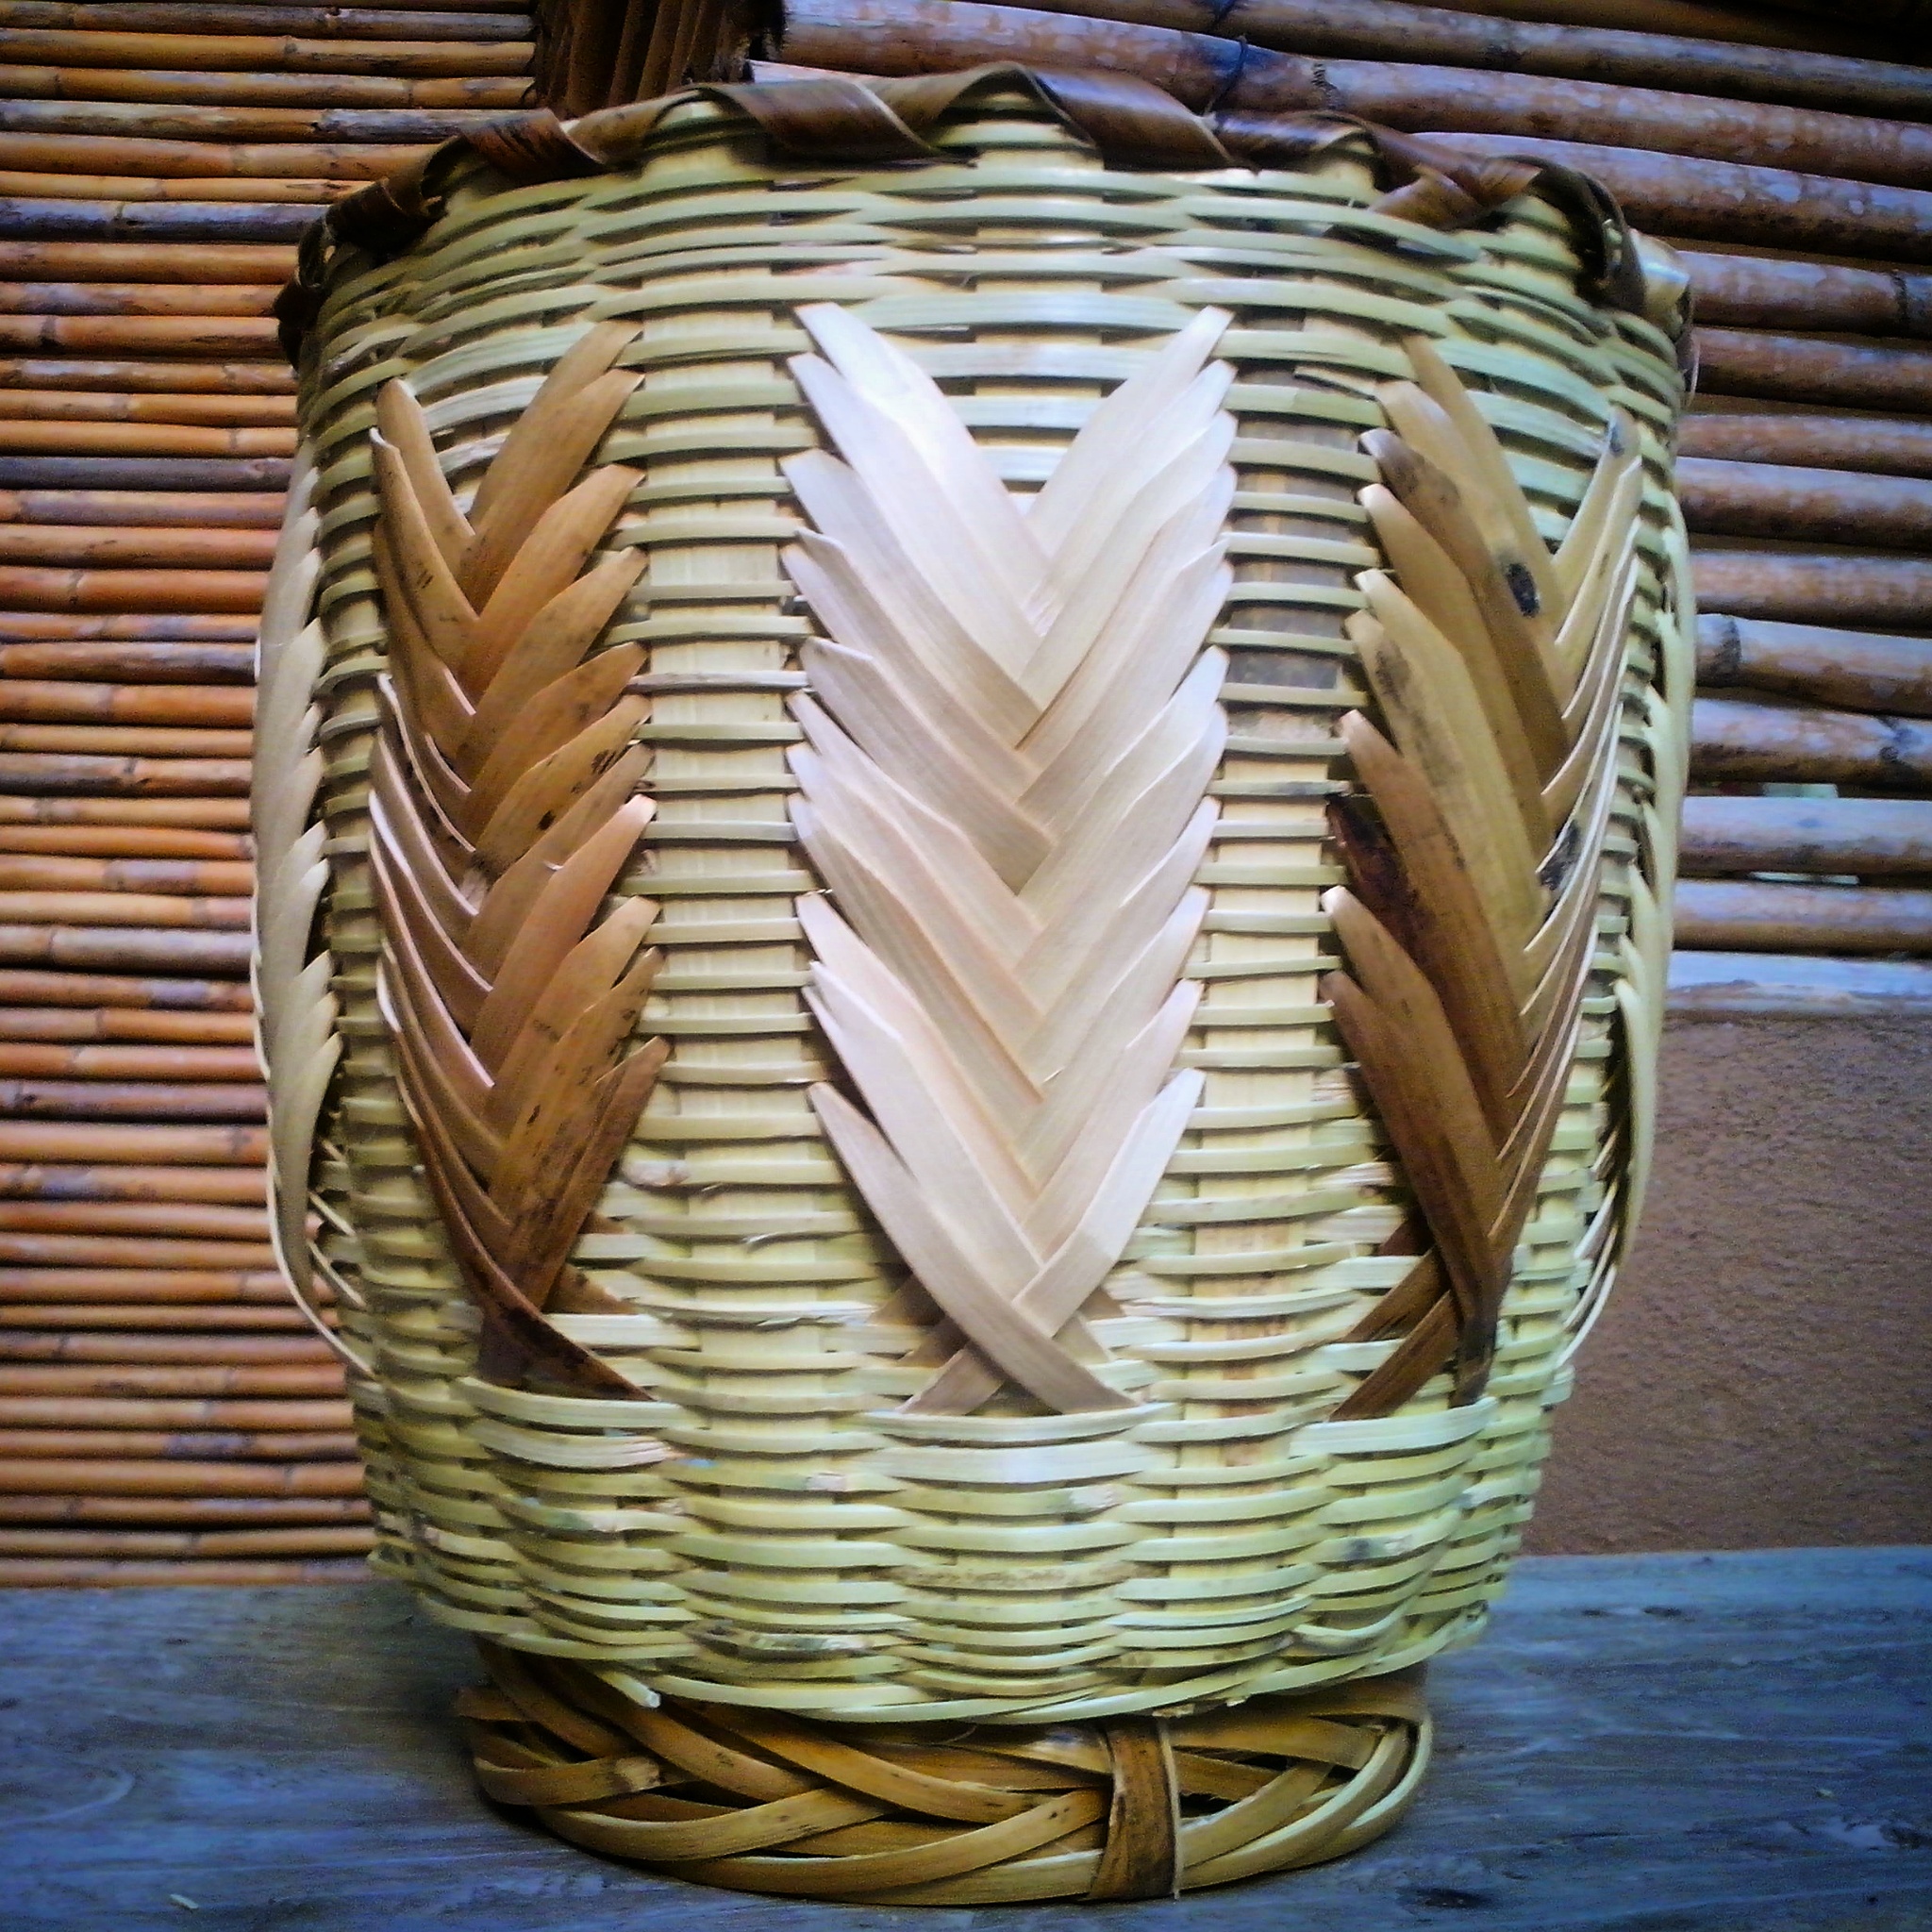 Second straight edge basket completed